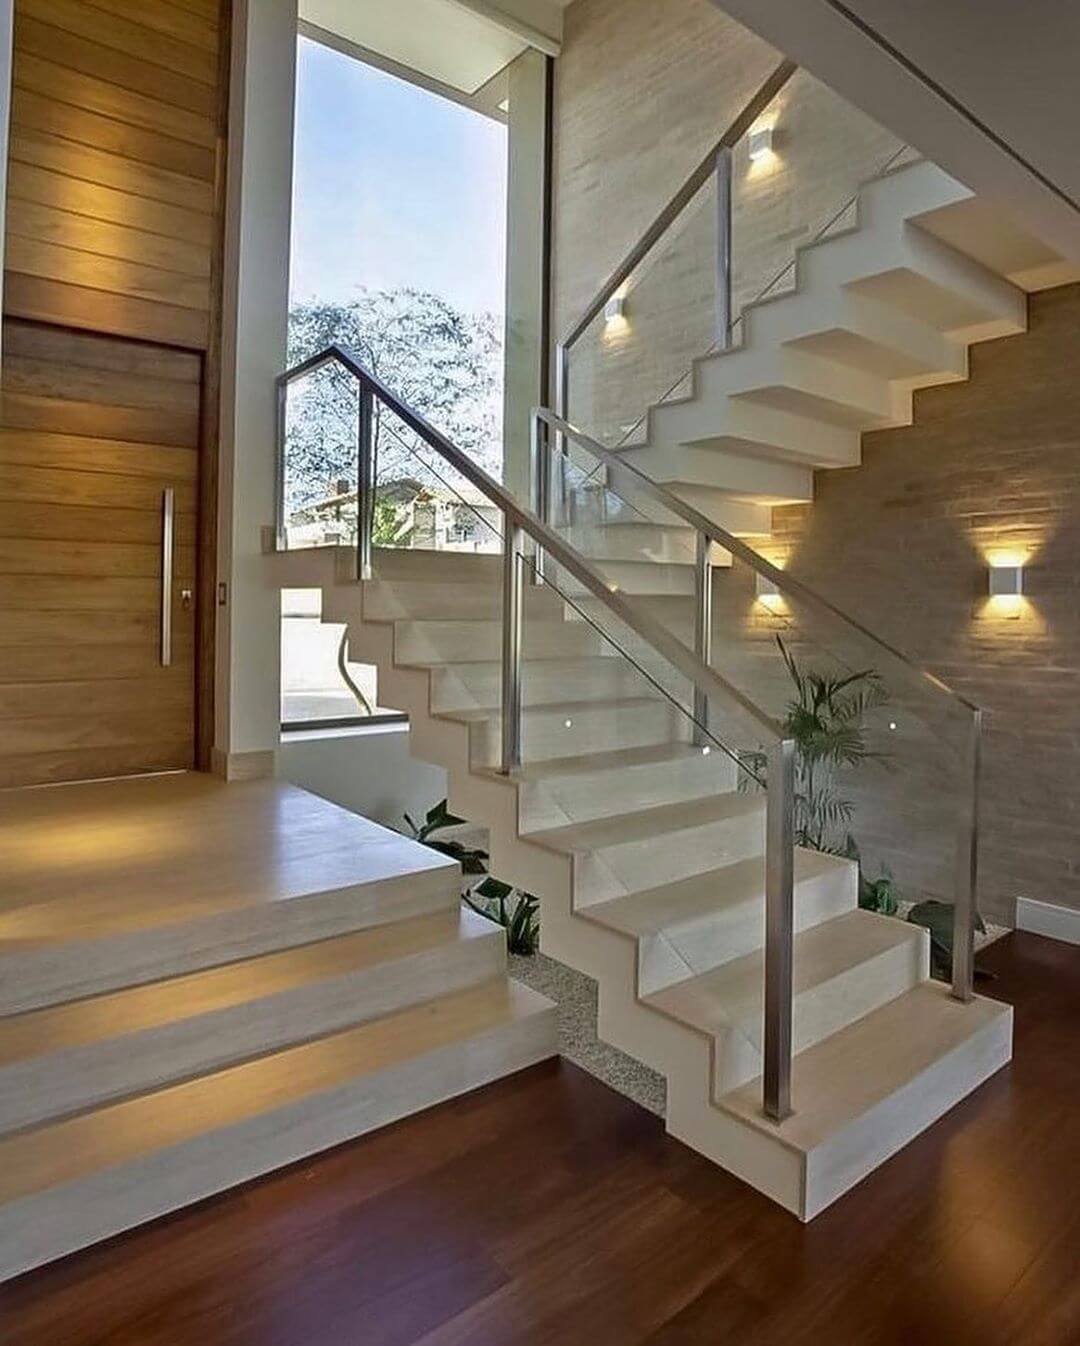 Staircase with one flight of steps